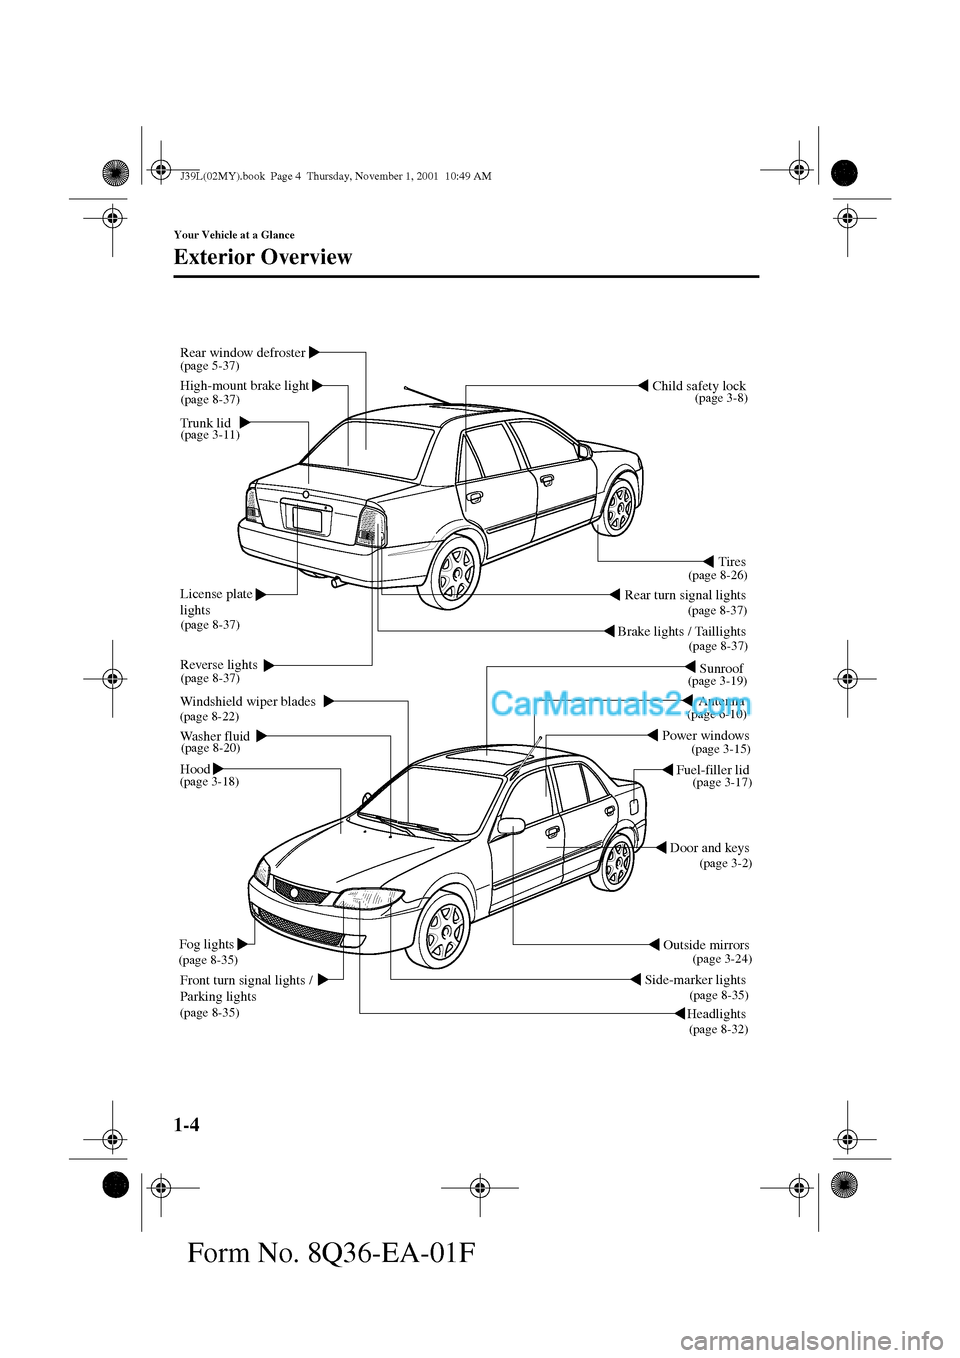 MAZDA MODEL PROTÉGÉ 2002  Owners Manual (in English) 1-4
Your Vehicle at a Glance
Form No. 8Q36-EA-01F
Exterior Overview
Door and keys
Outside mirrors
Side-marker lights 
Headlights  Fuel-filler lid Child safety lock 
Tires 
Reverse lights
Windshield wi